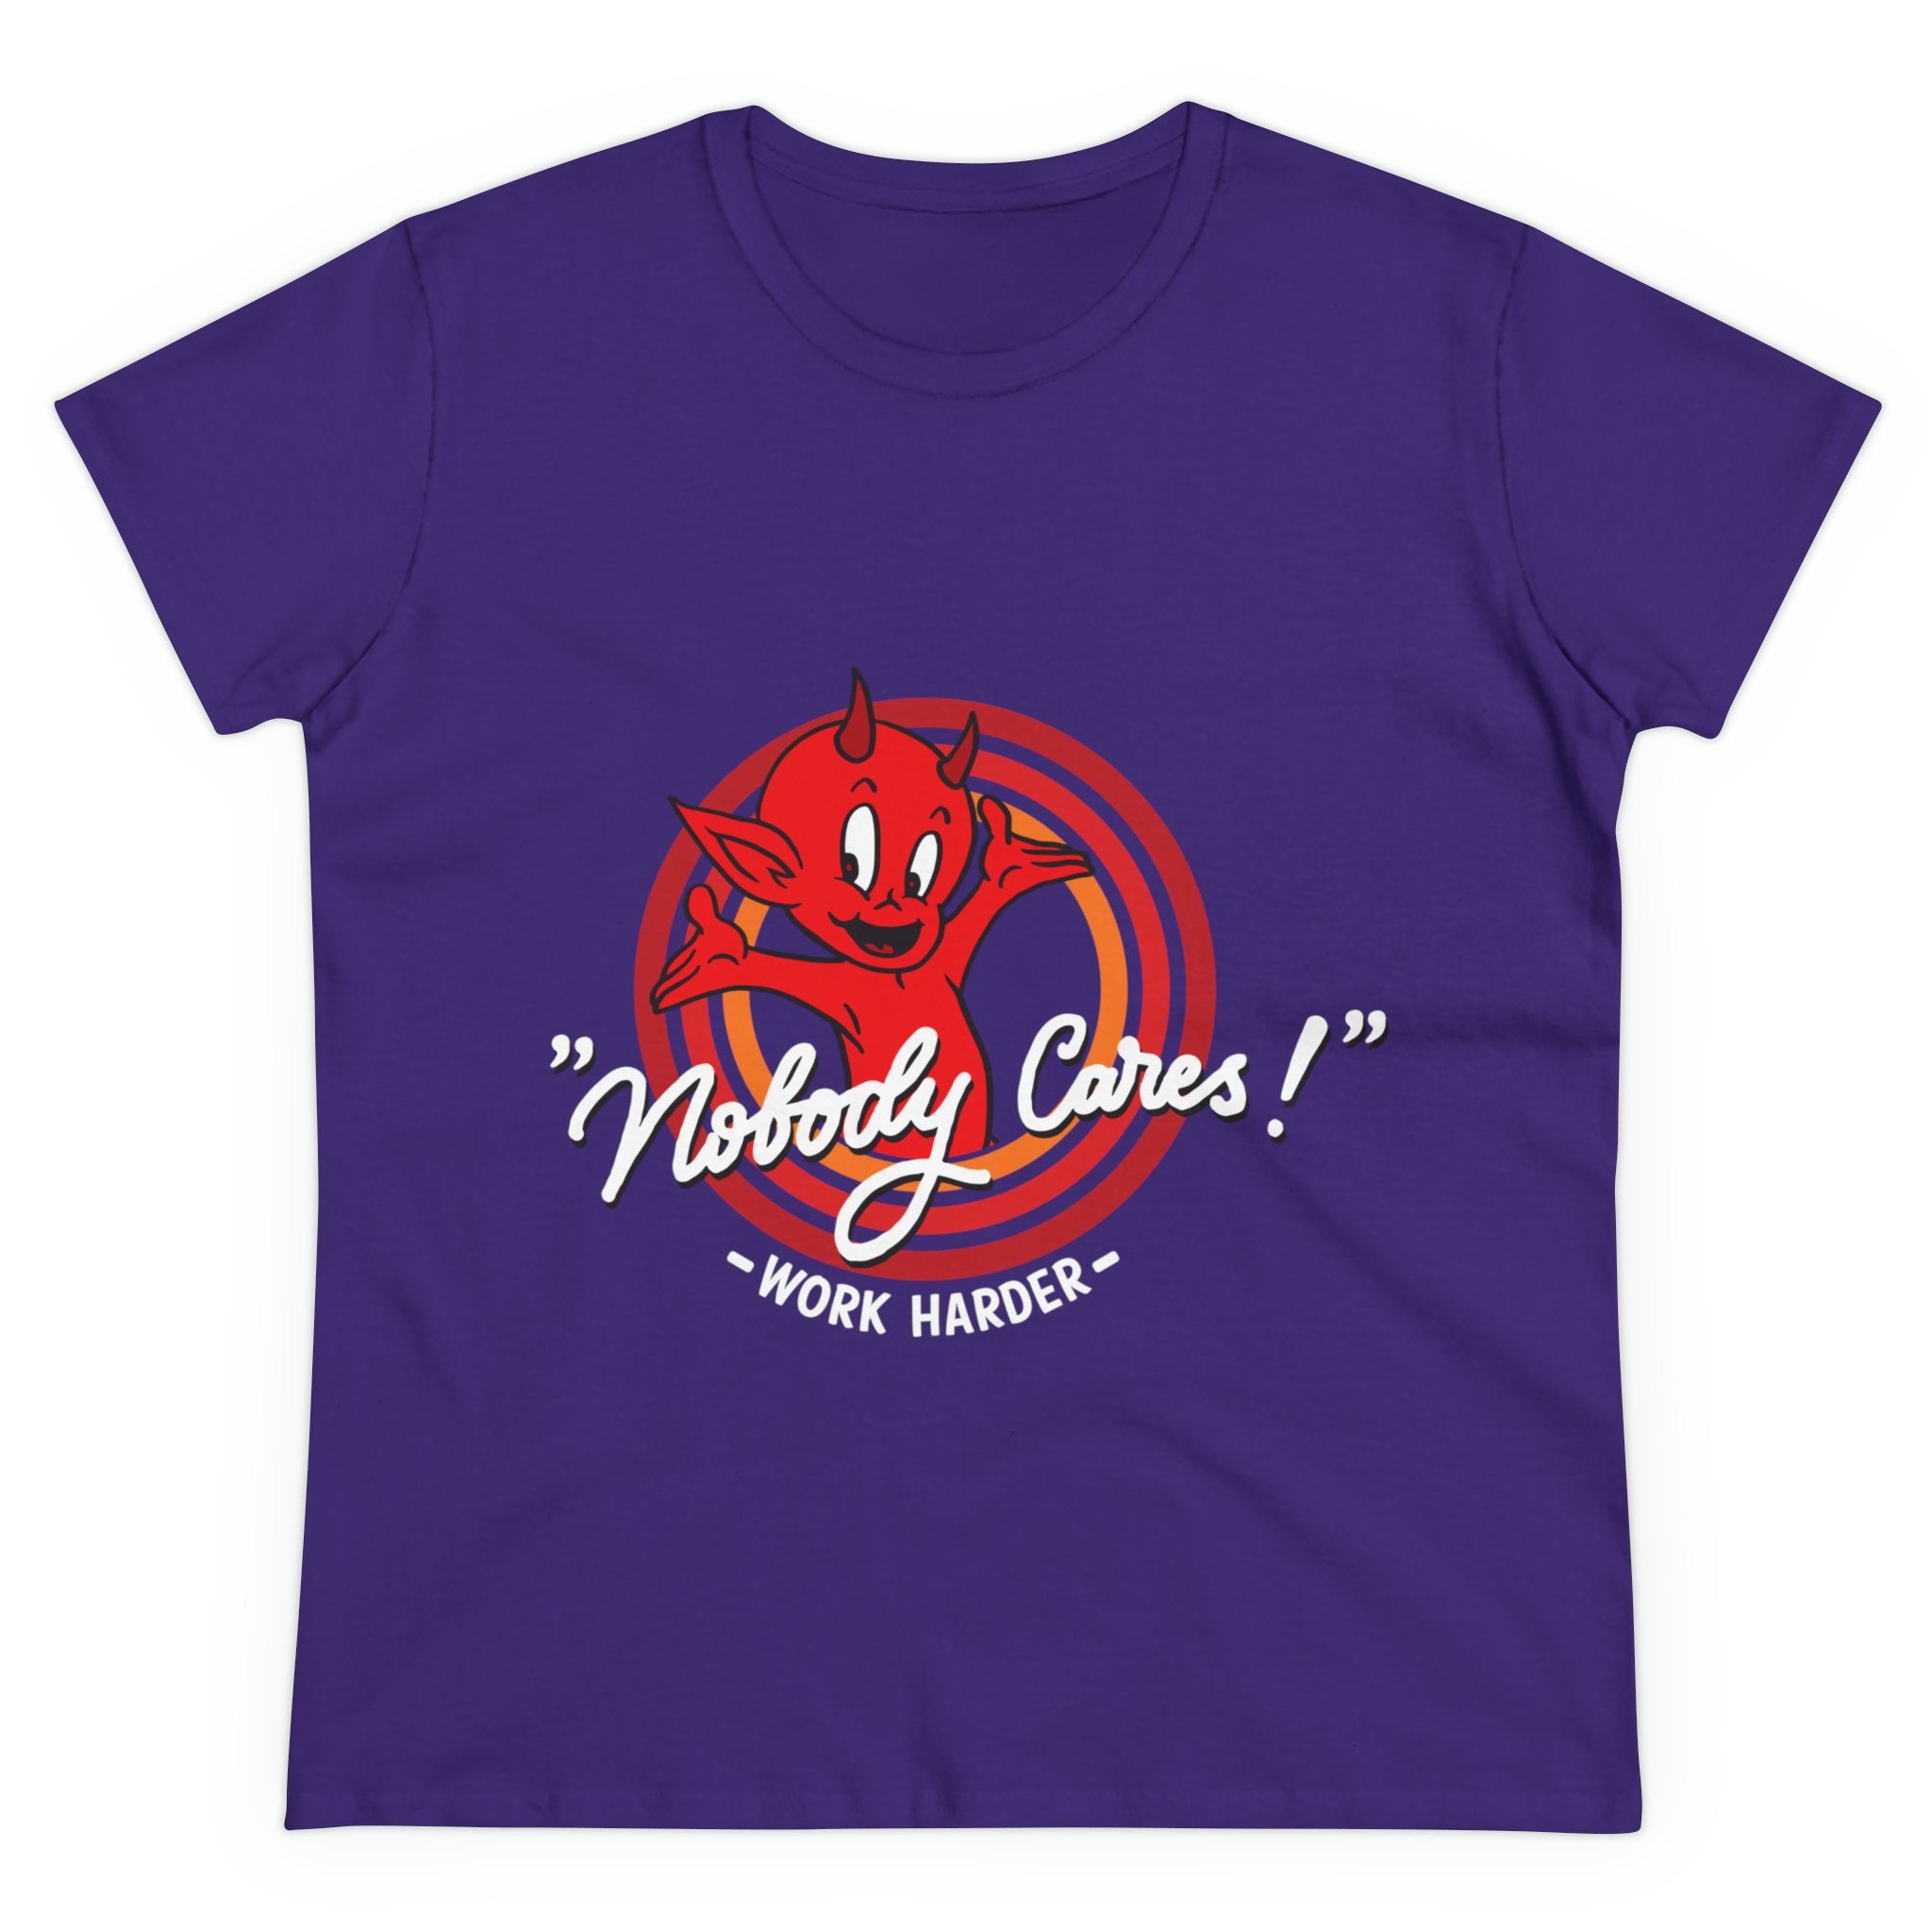 Nobody Cares - Women's Tee, pre-shrunk cotton, featuring a red cartoon devil and the text "Nobody Cares! Work Harder" on the front, designed with a semi-fitted silhouette for a flattering look.